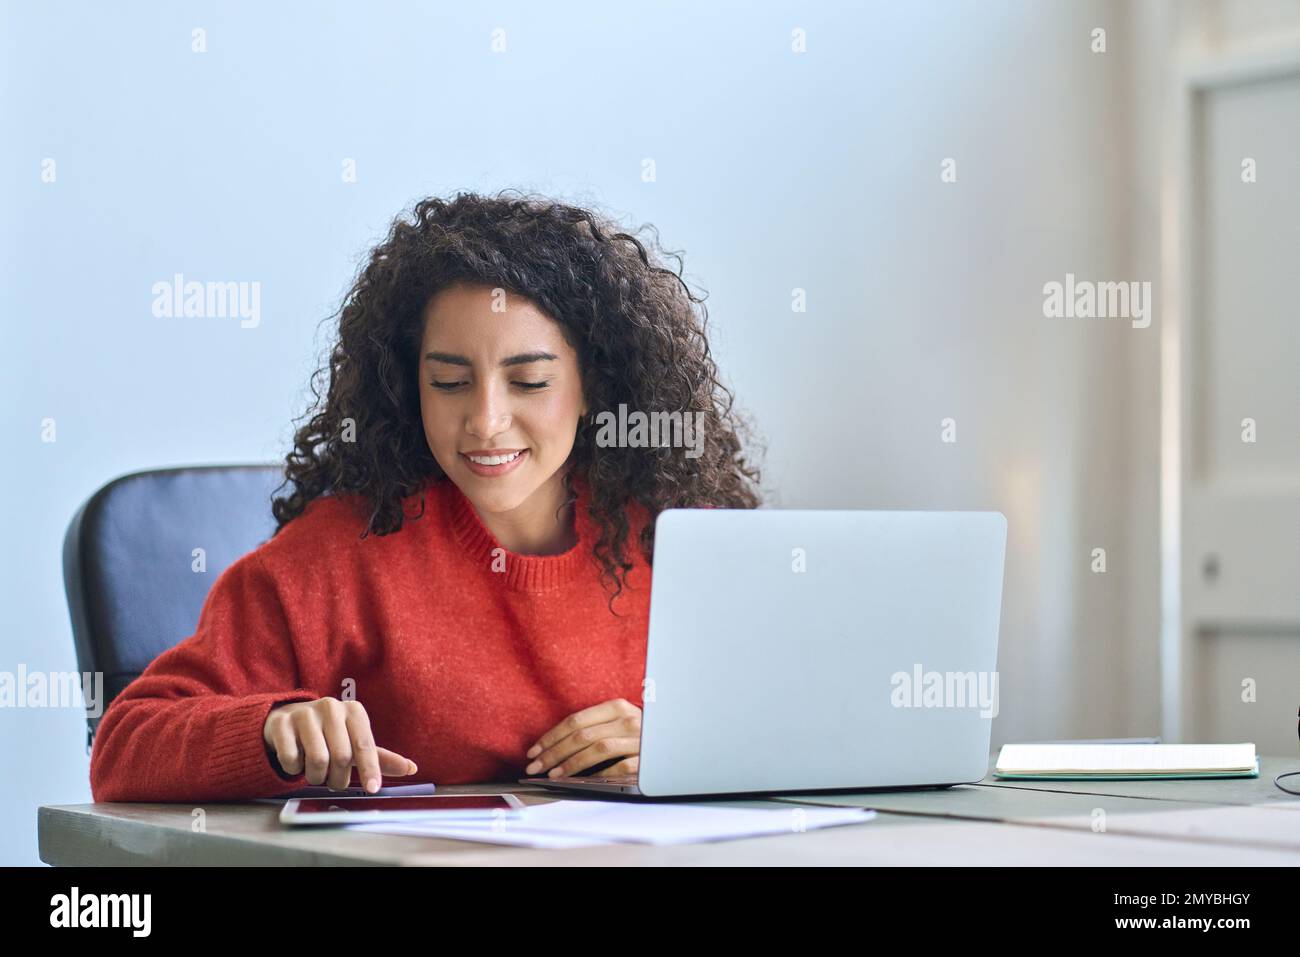 Young smiling latin business woman sitting at office desk using digital tablet. Stock Photo